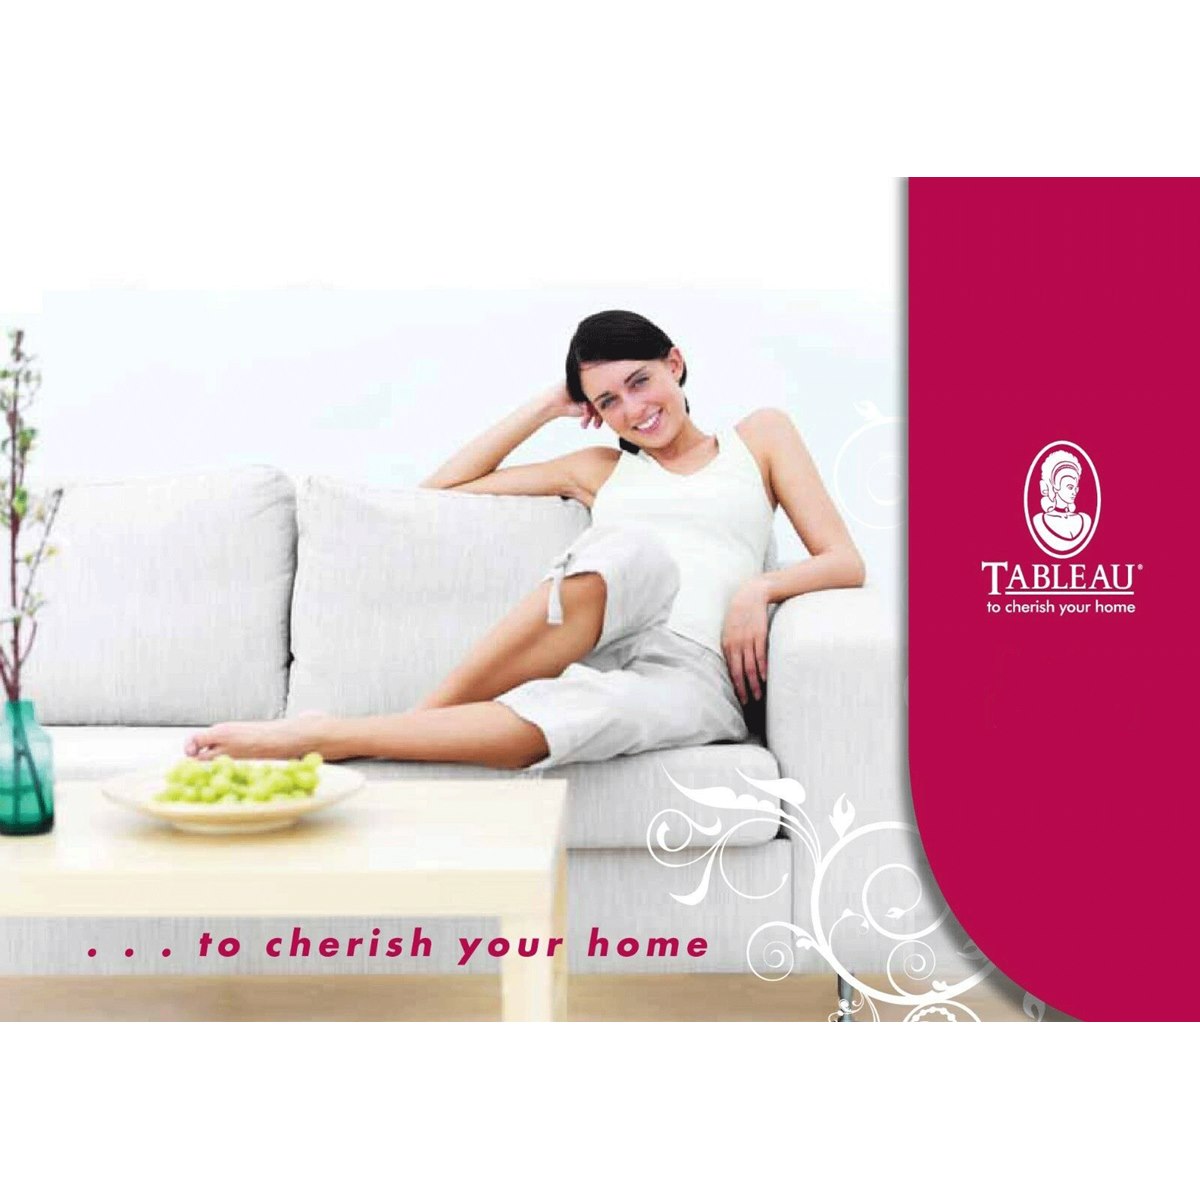 Tableau Cleaning Products